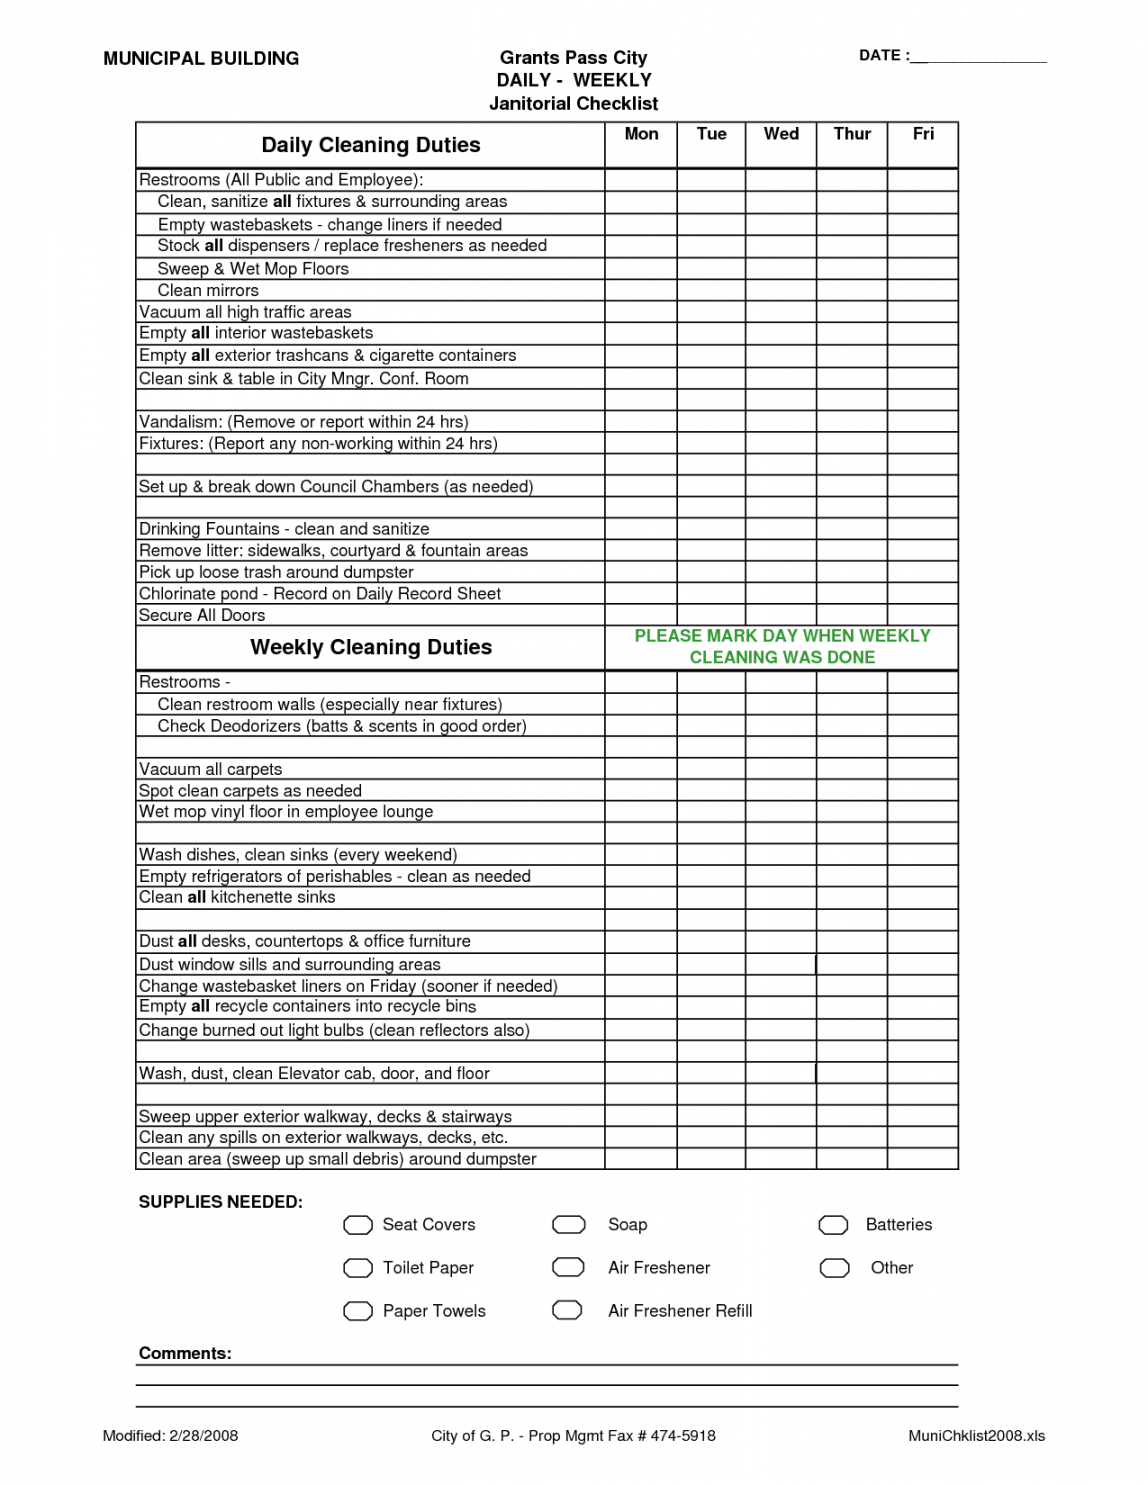 Janitorial Cleaning Checklist Template